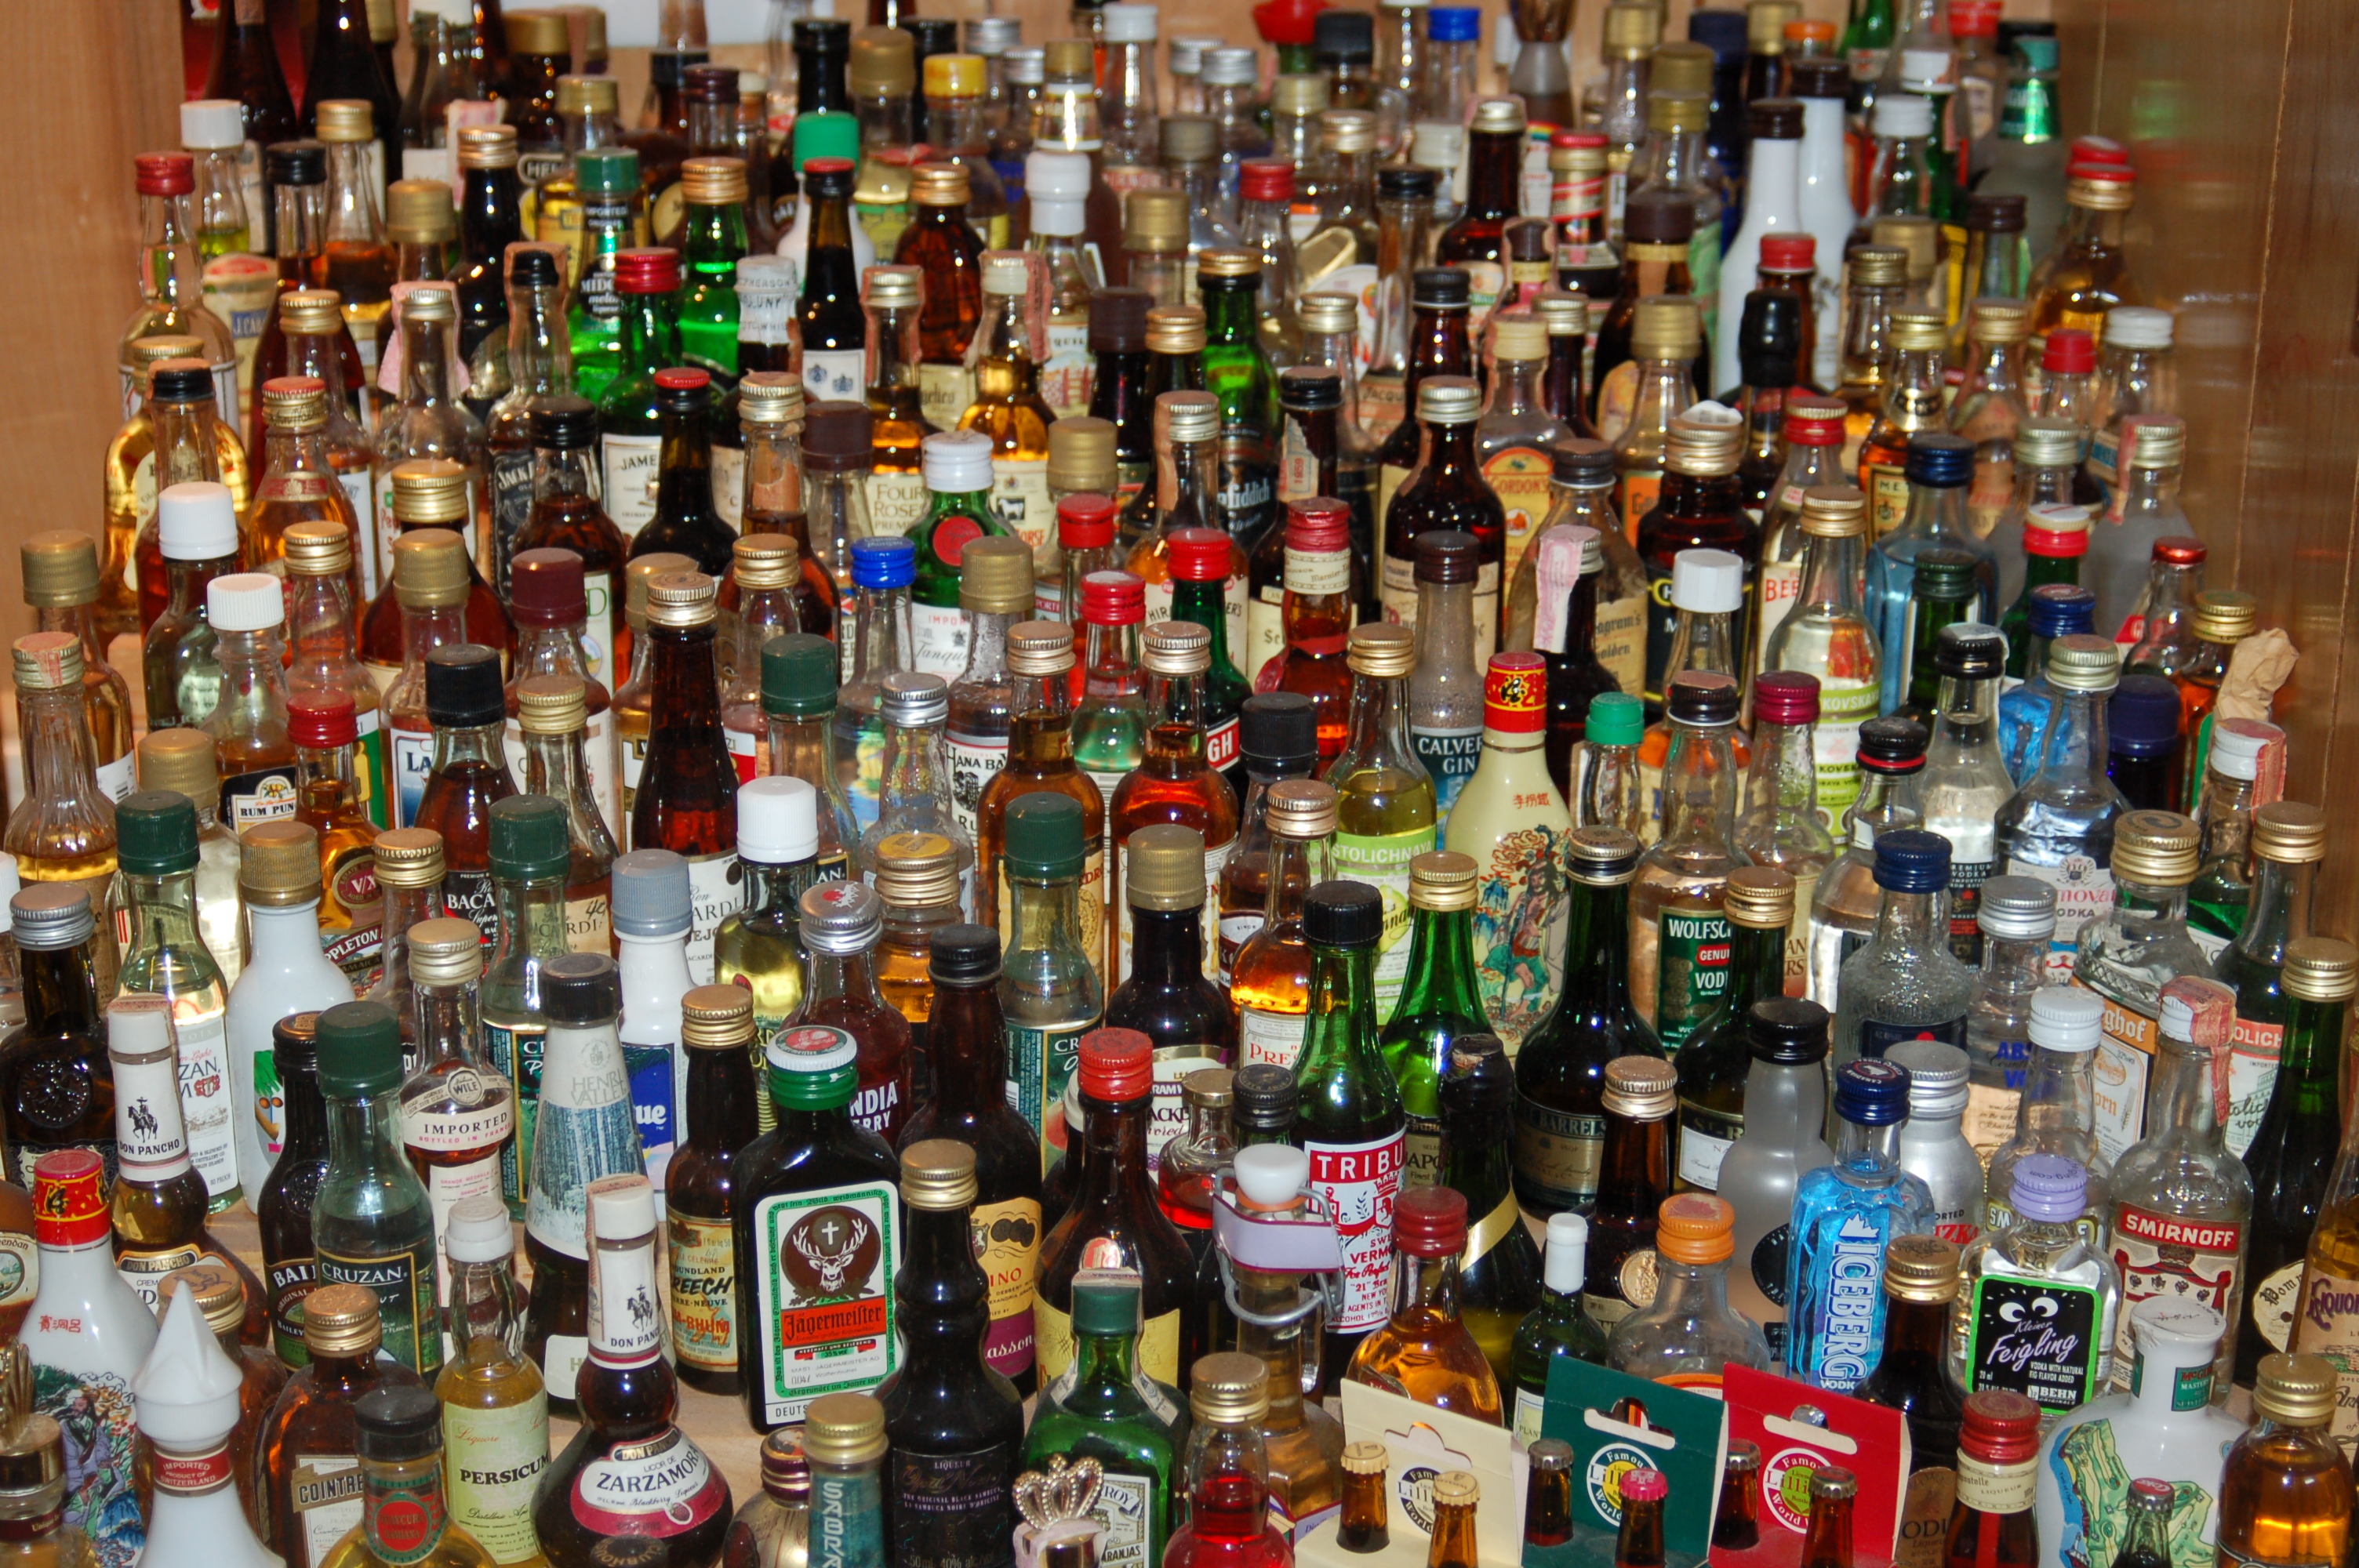 Alcohol most dangerous substance available, says study